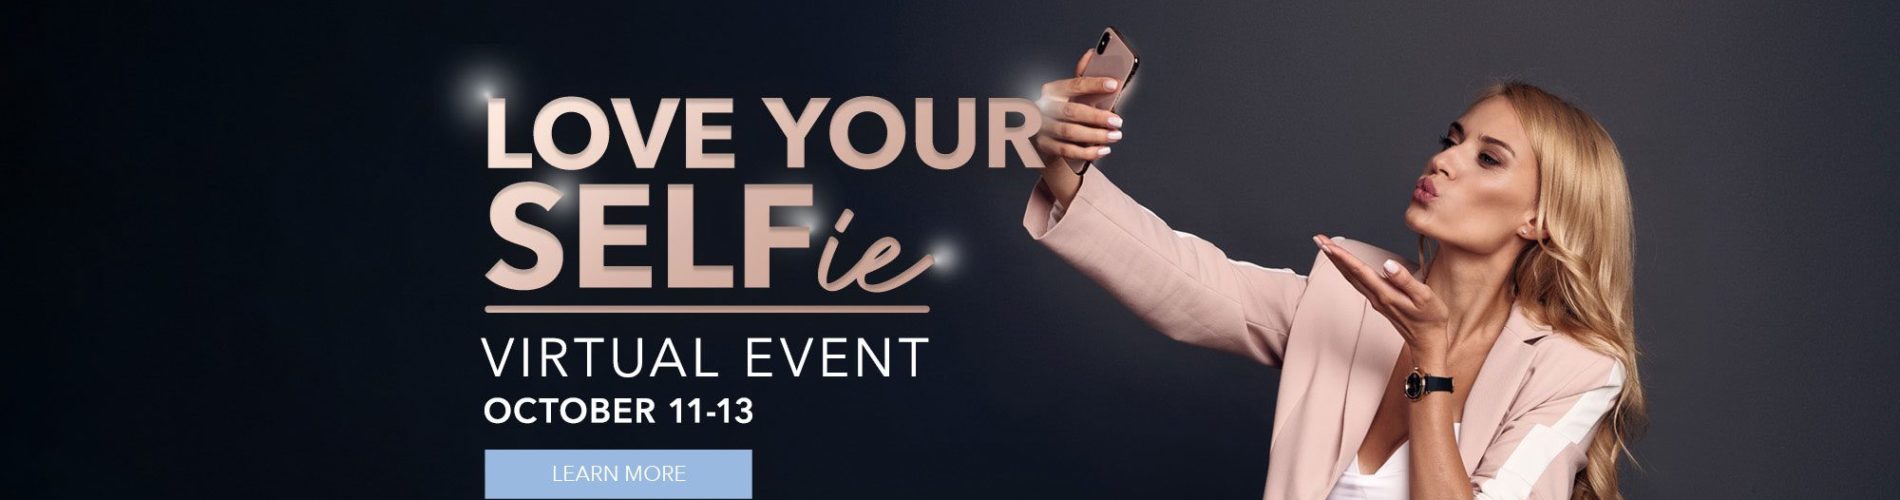 Love Your SELFie Virtual Event